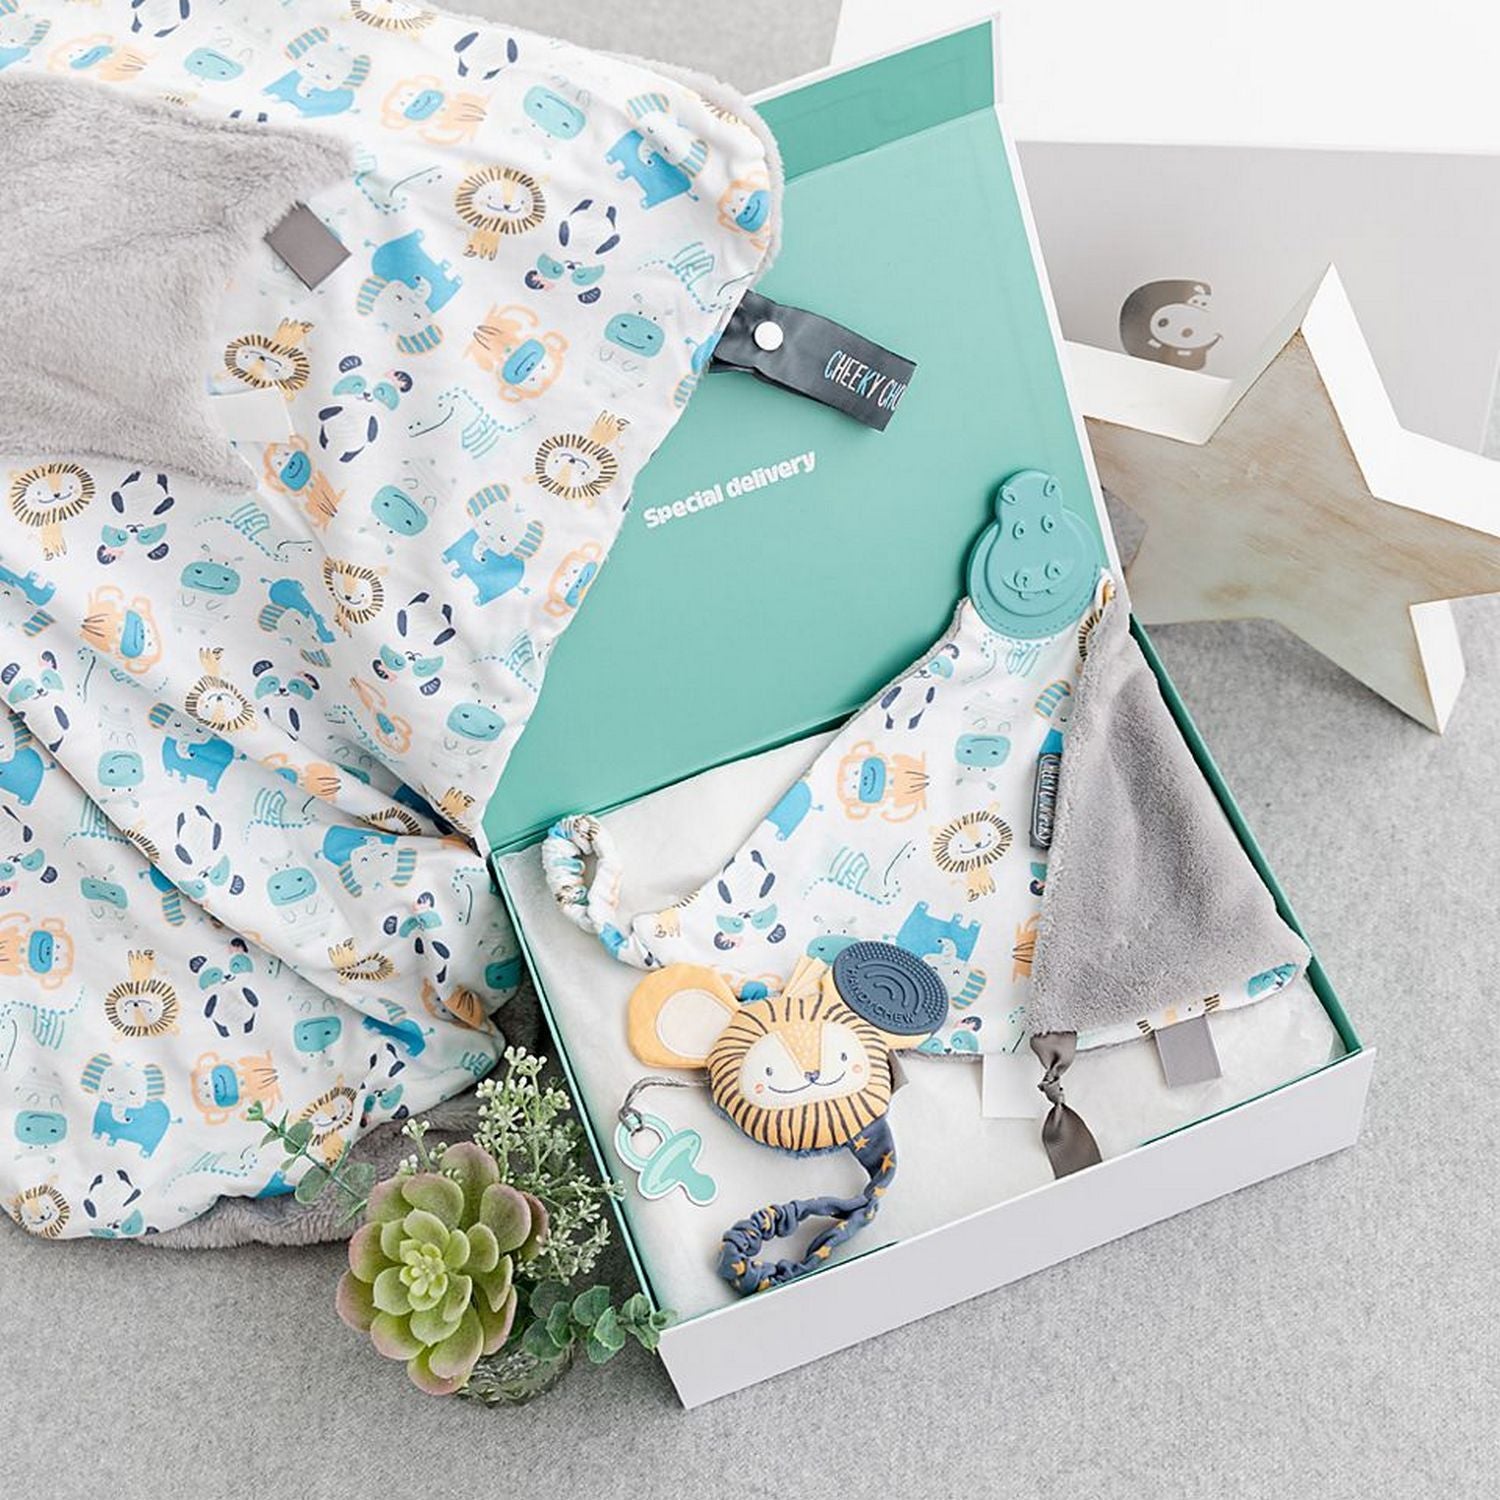 Cheeky Animals Travel Blanket Baby Gift Set - Cheeky Chompers